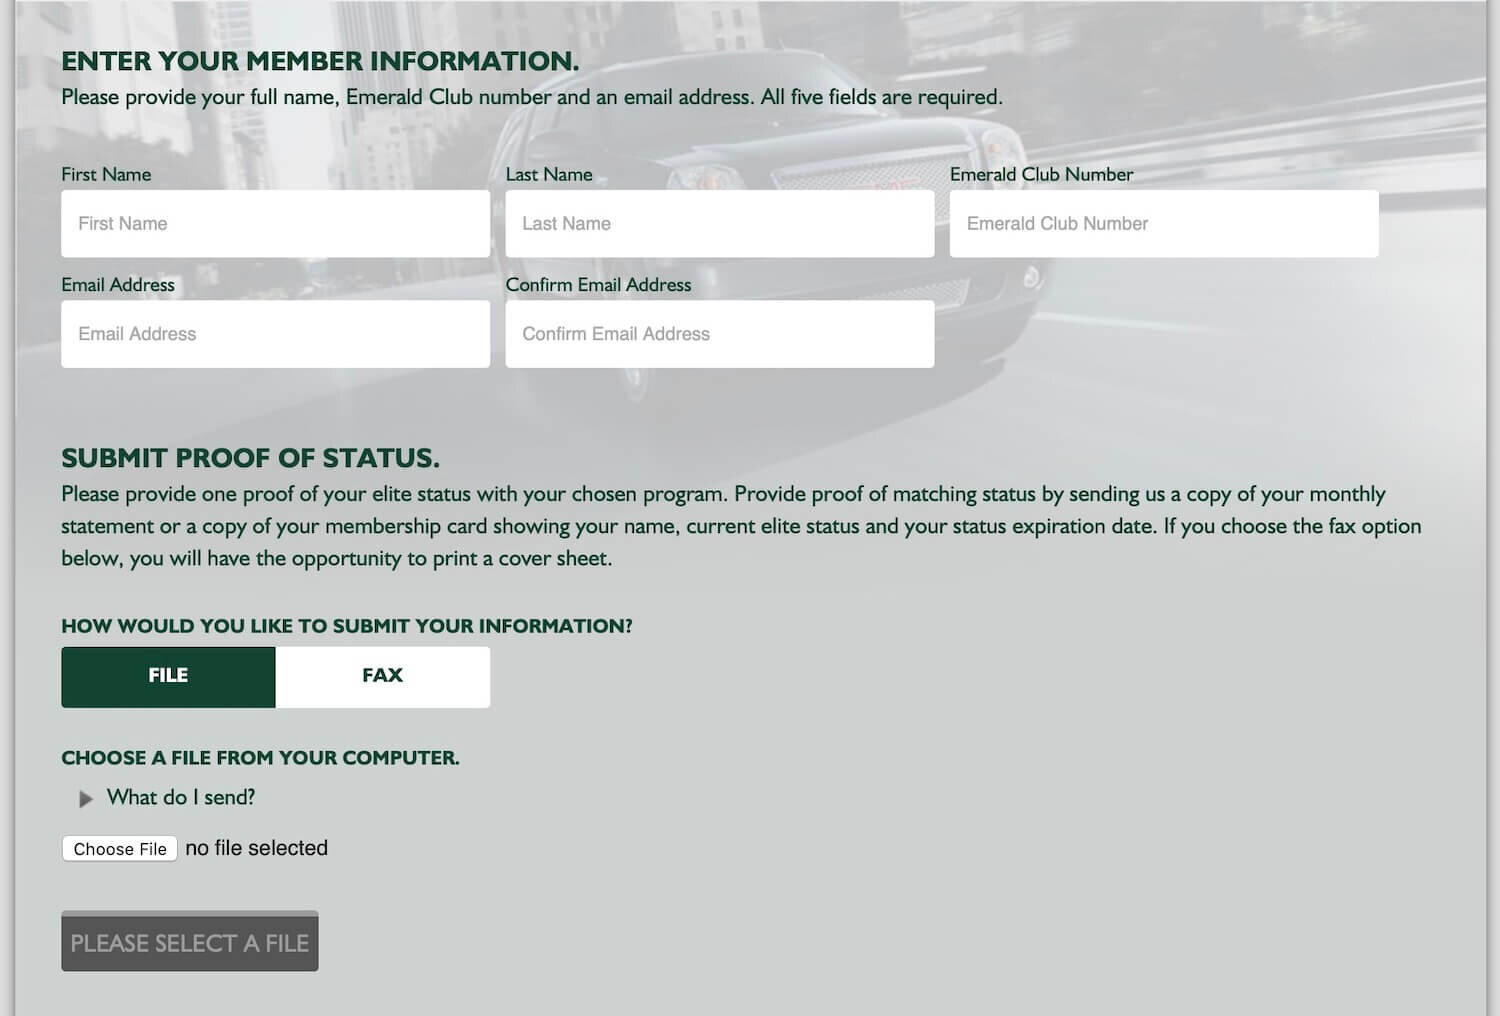 National Emerald Club - Member Info Required